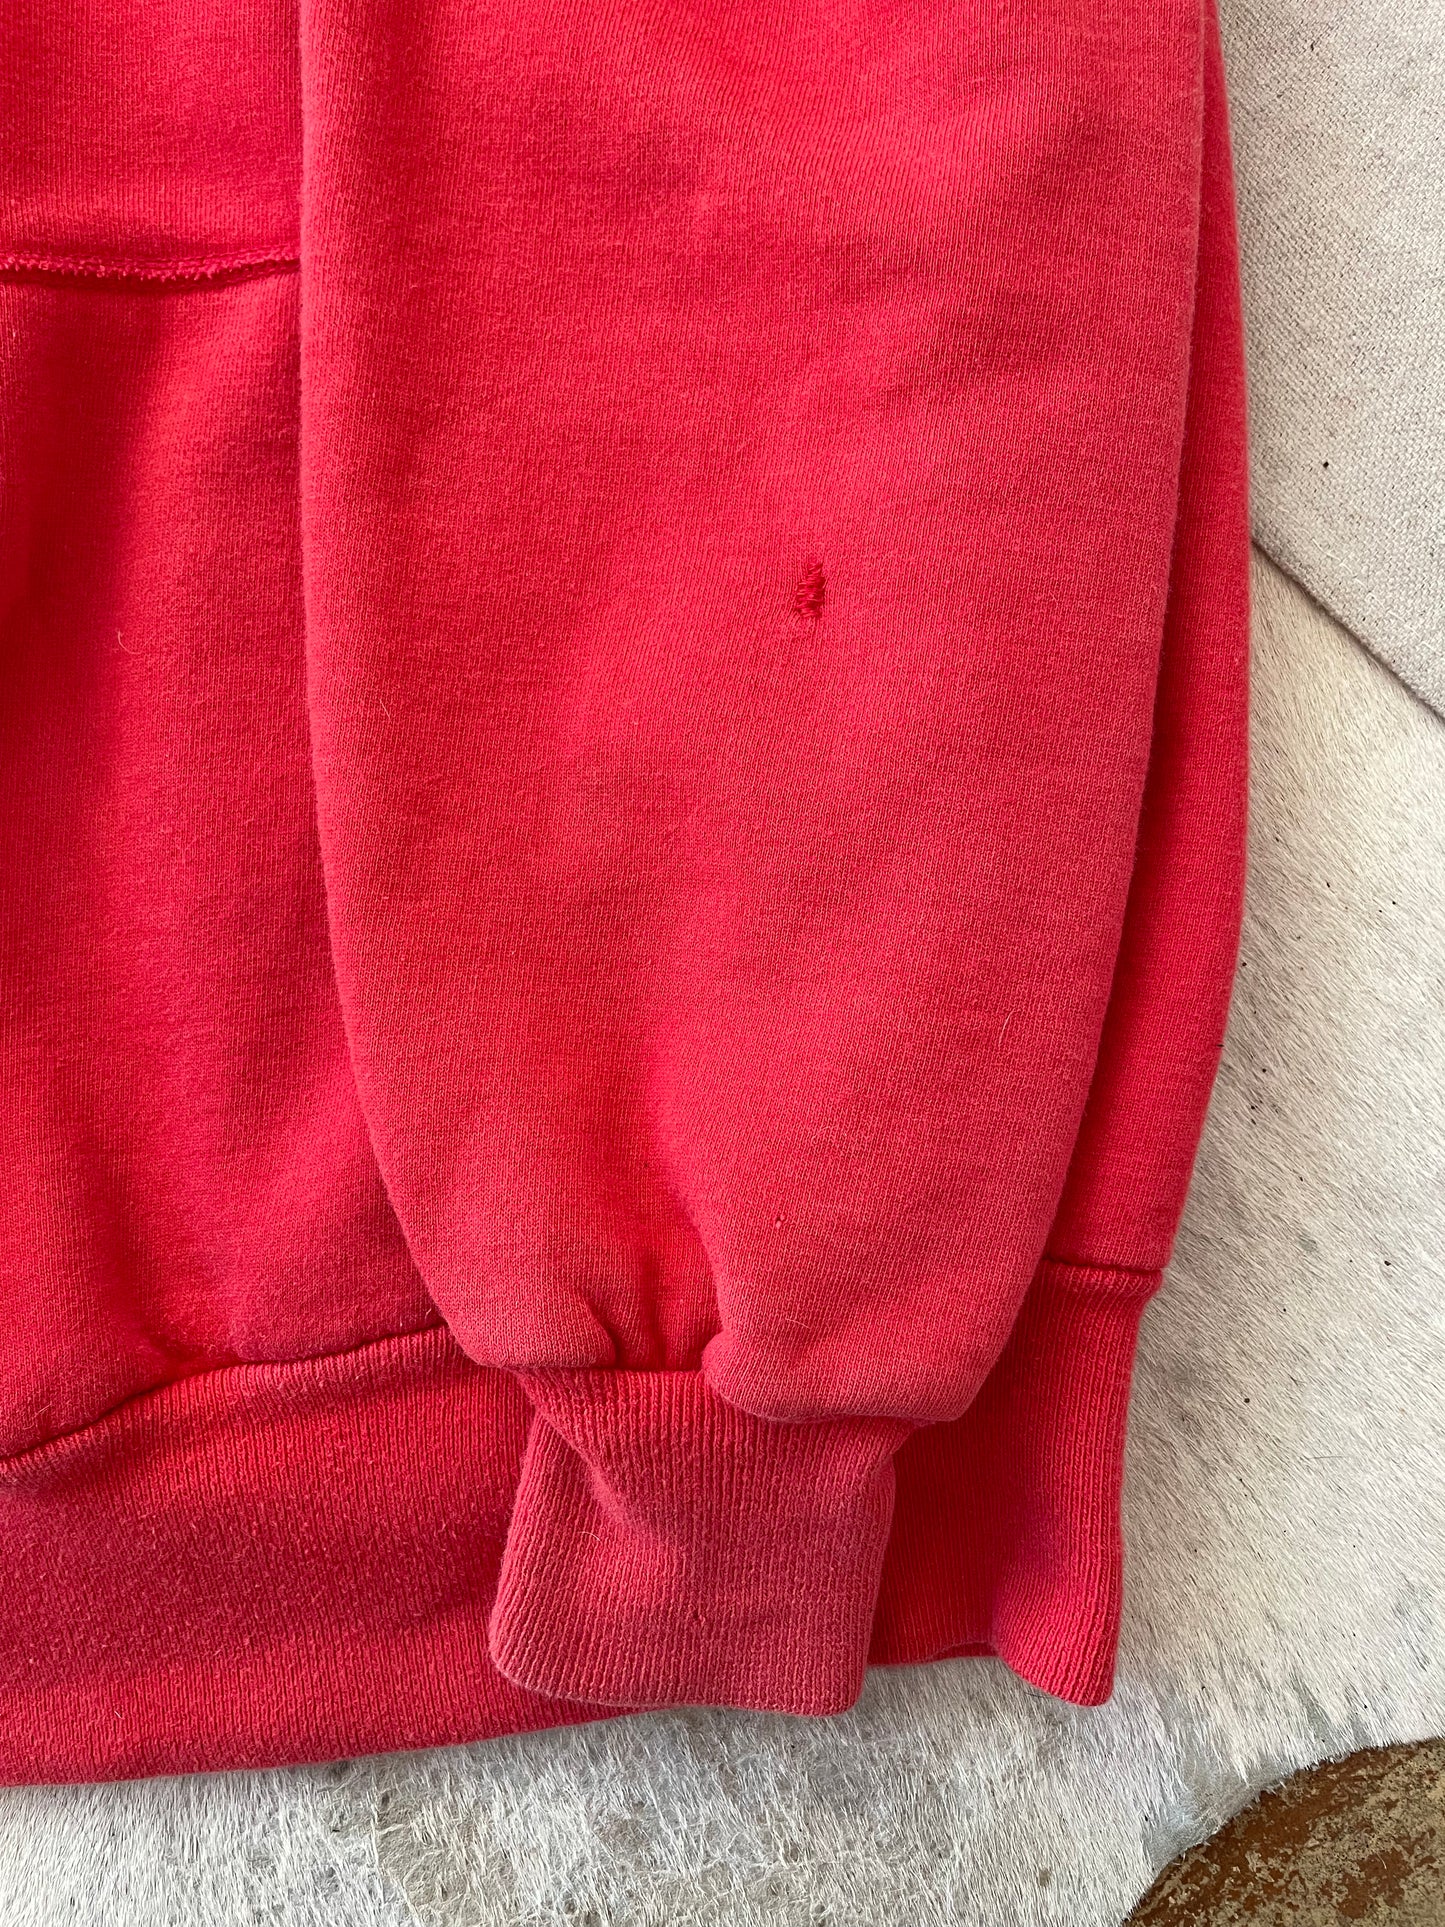 70s Faded Red Hoodie